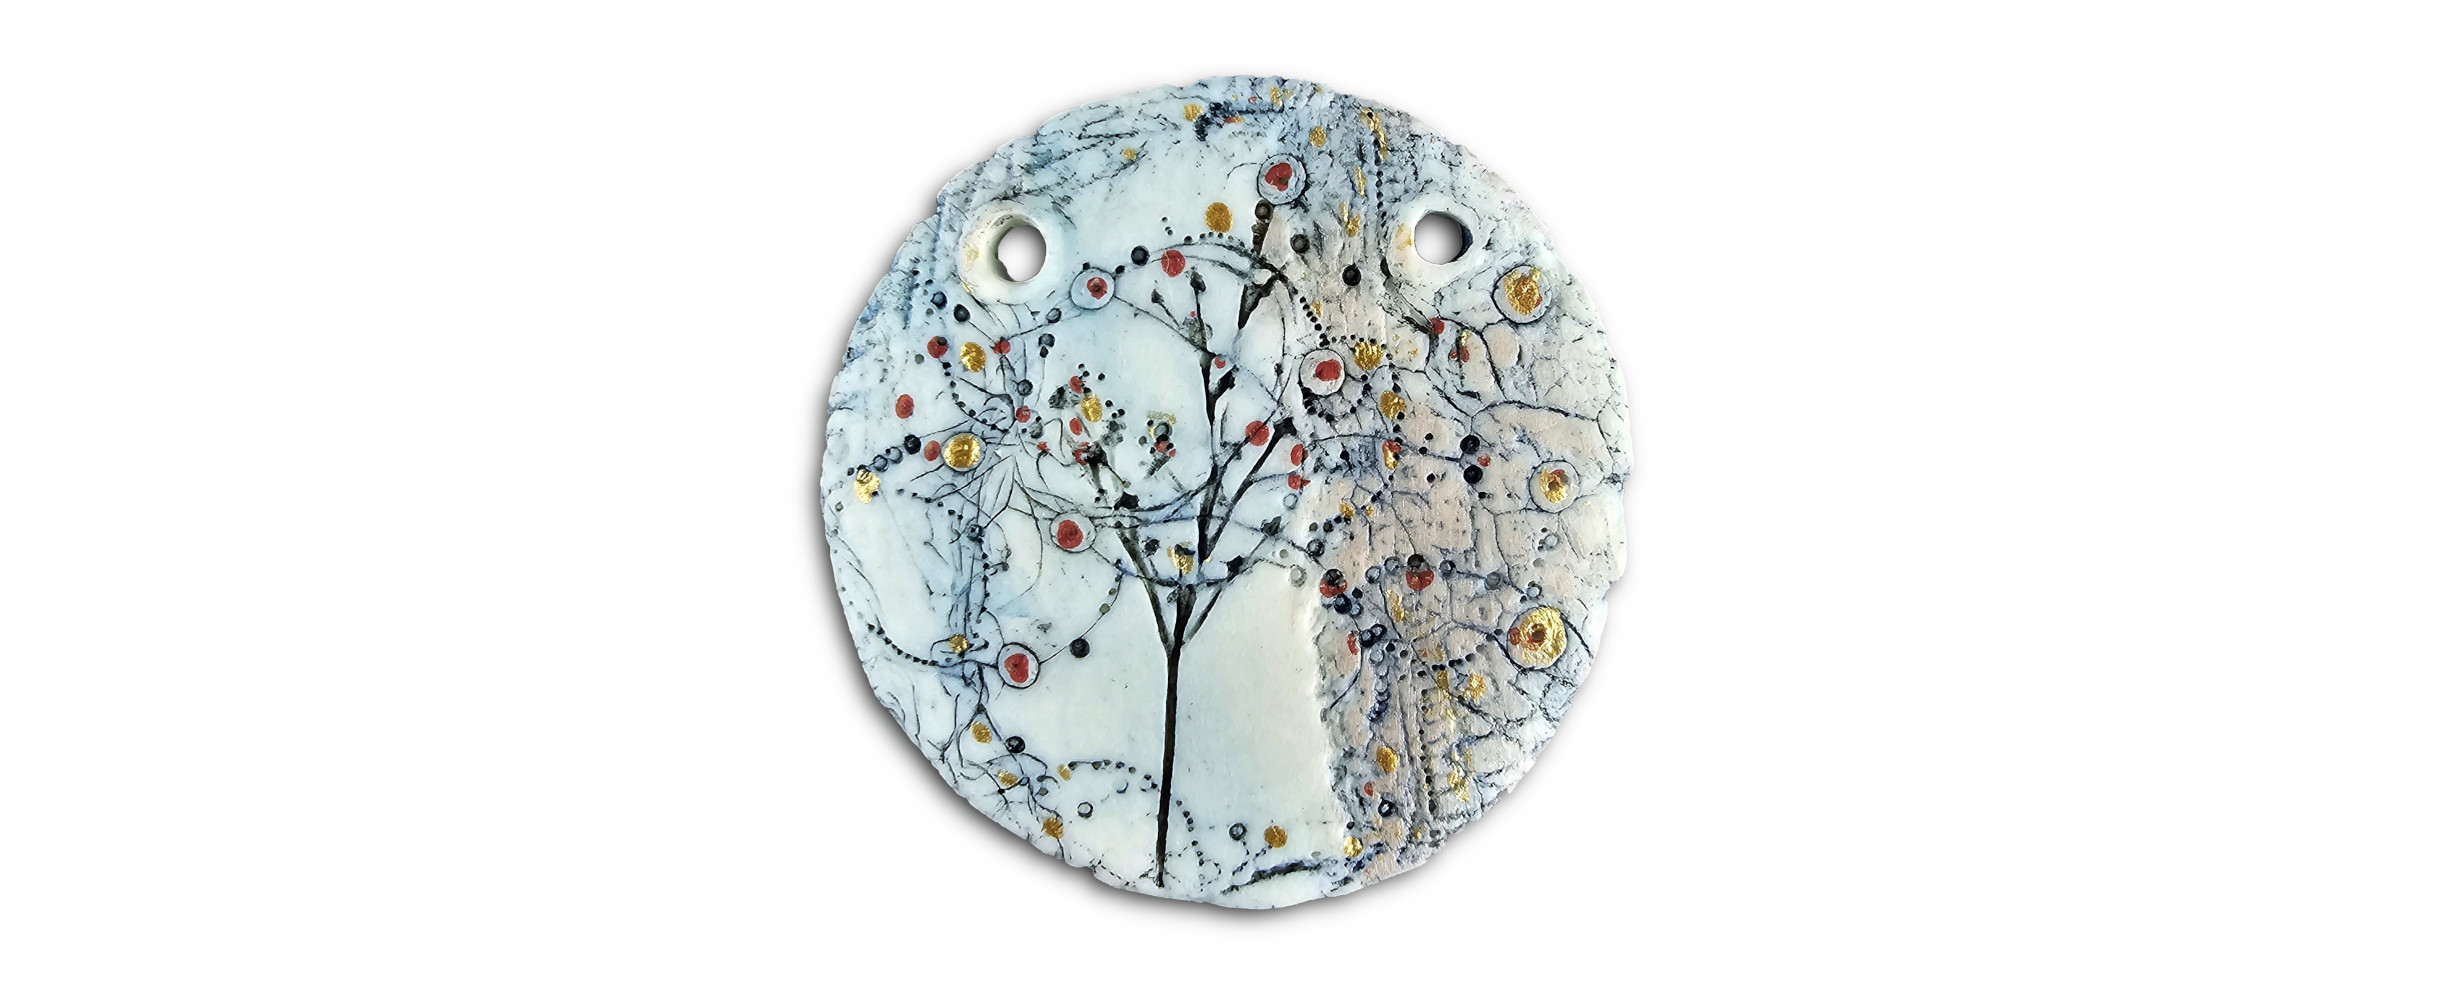 Porcelain Jewellery from The Nature of Porcelain